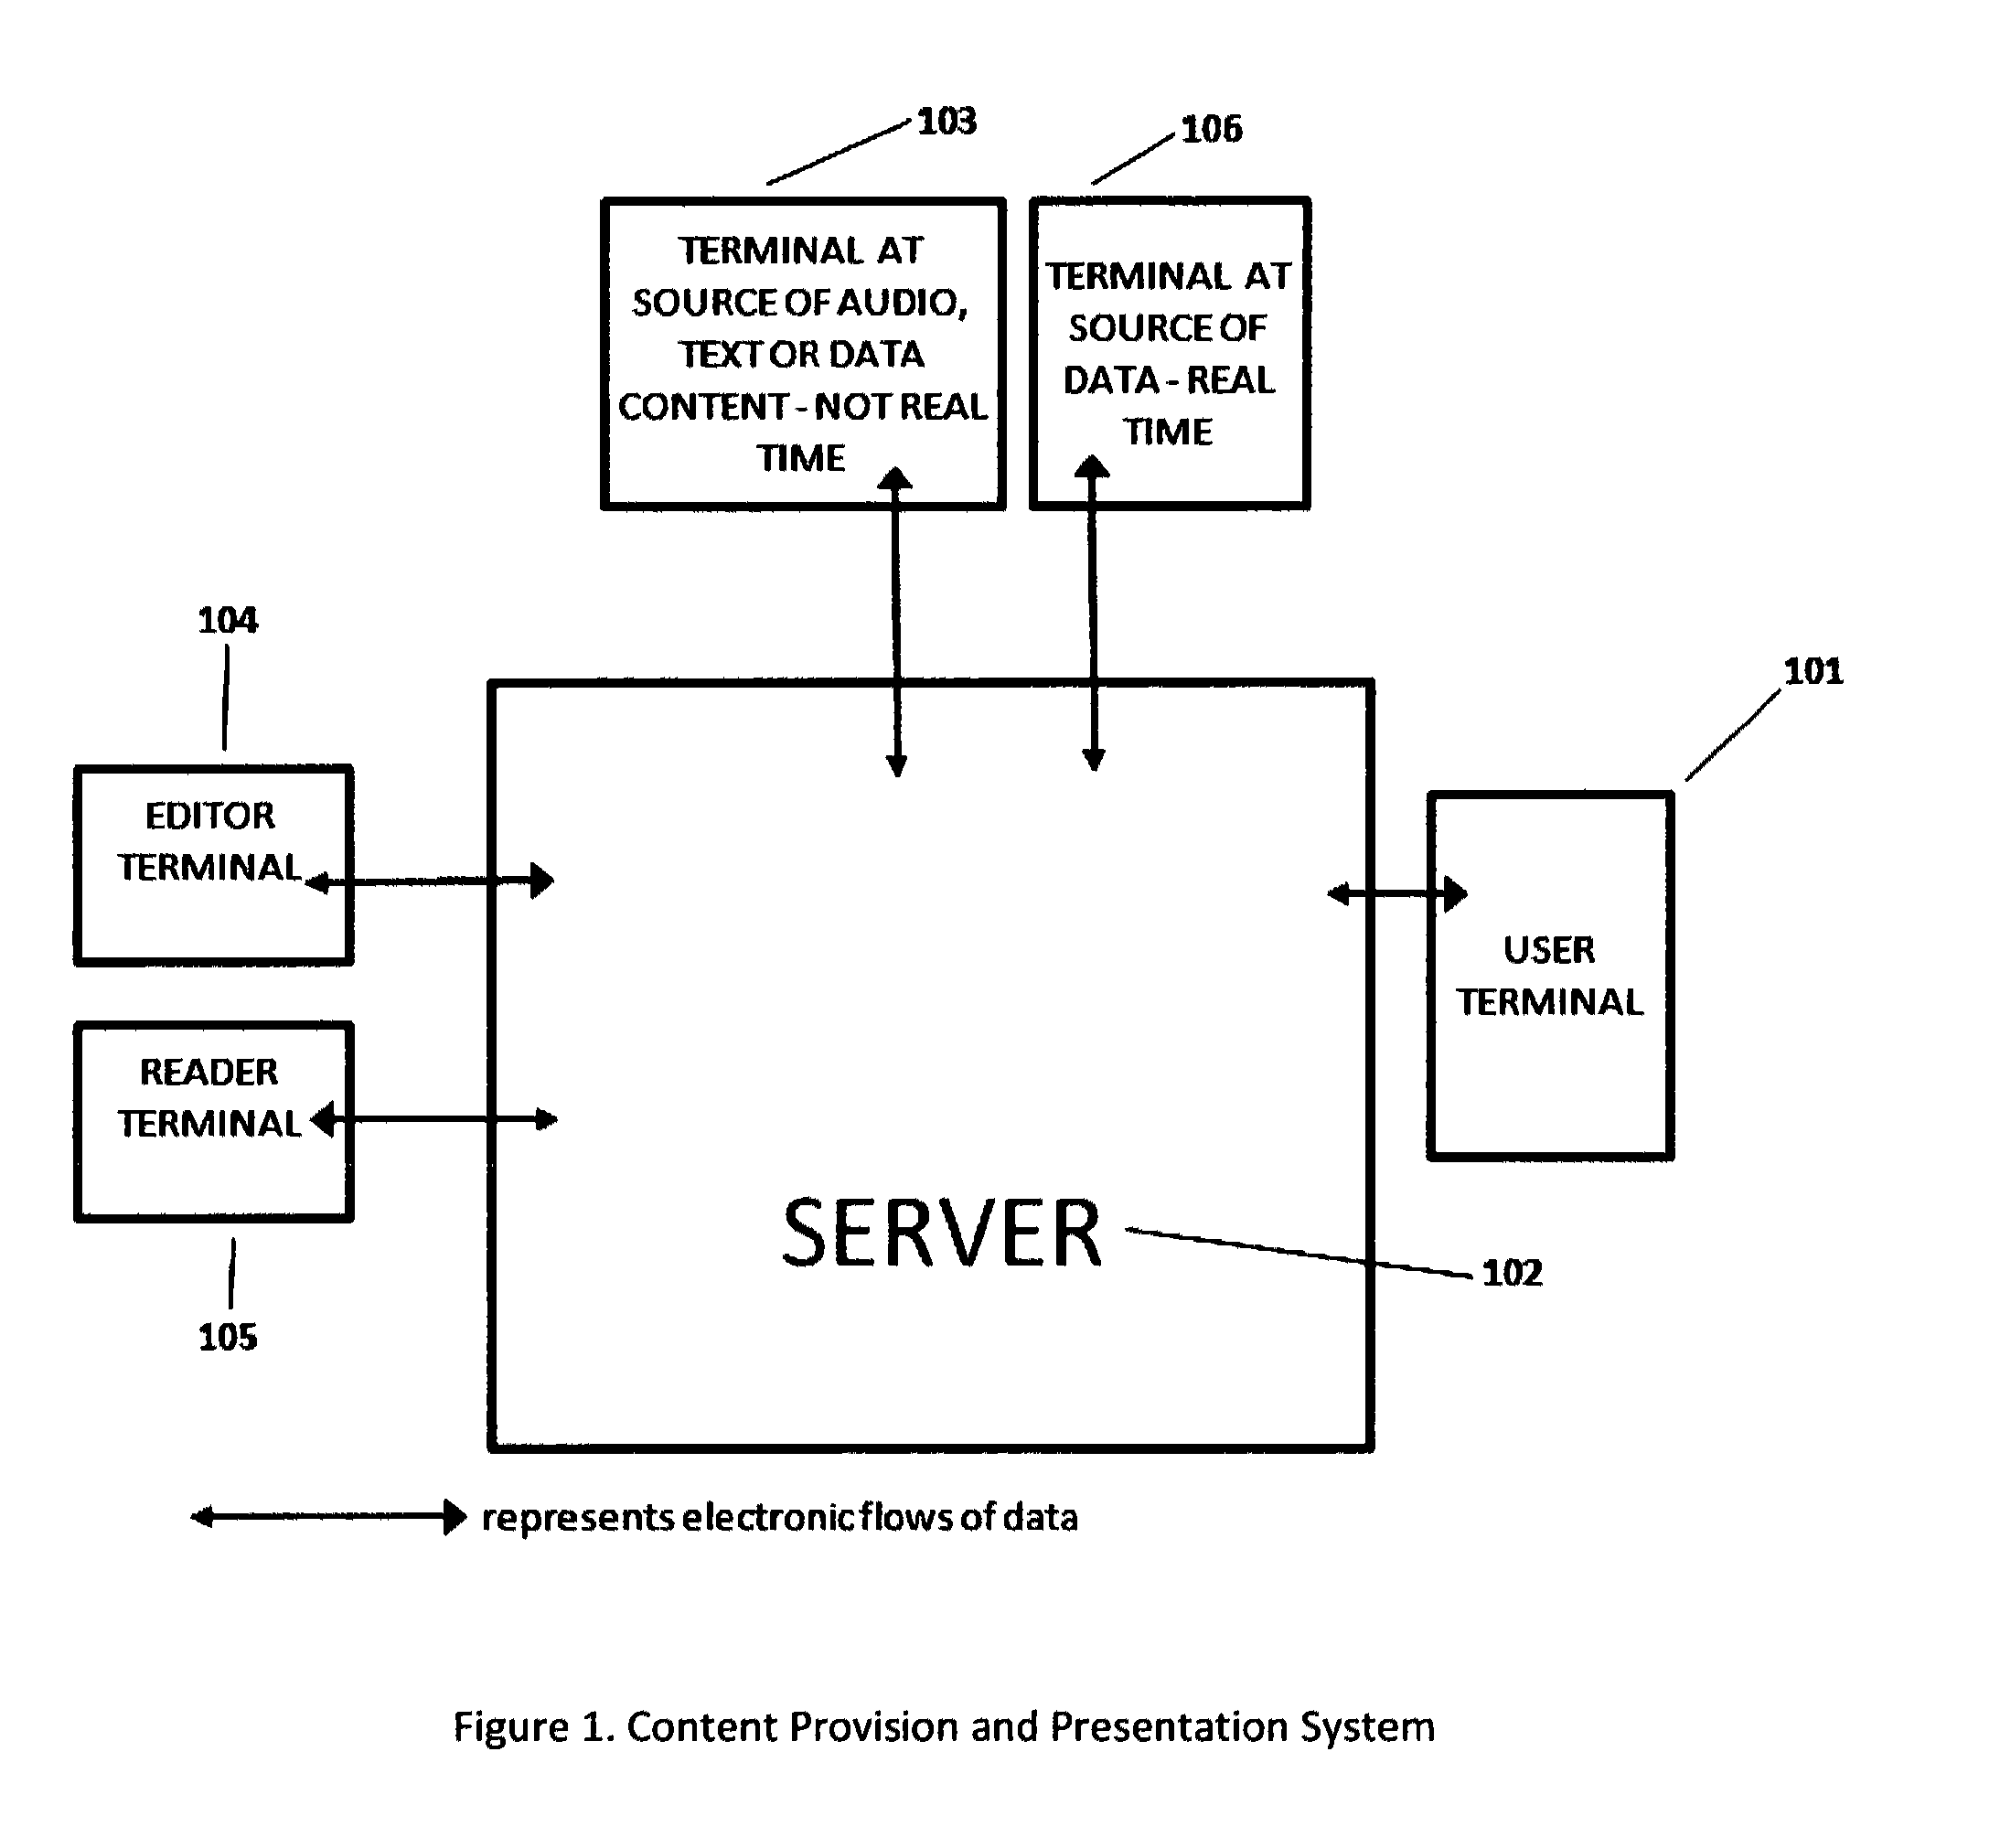 Method and System of Providing and Presenting Content to a User